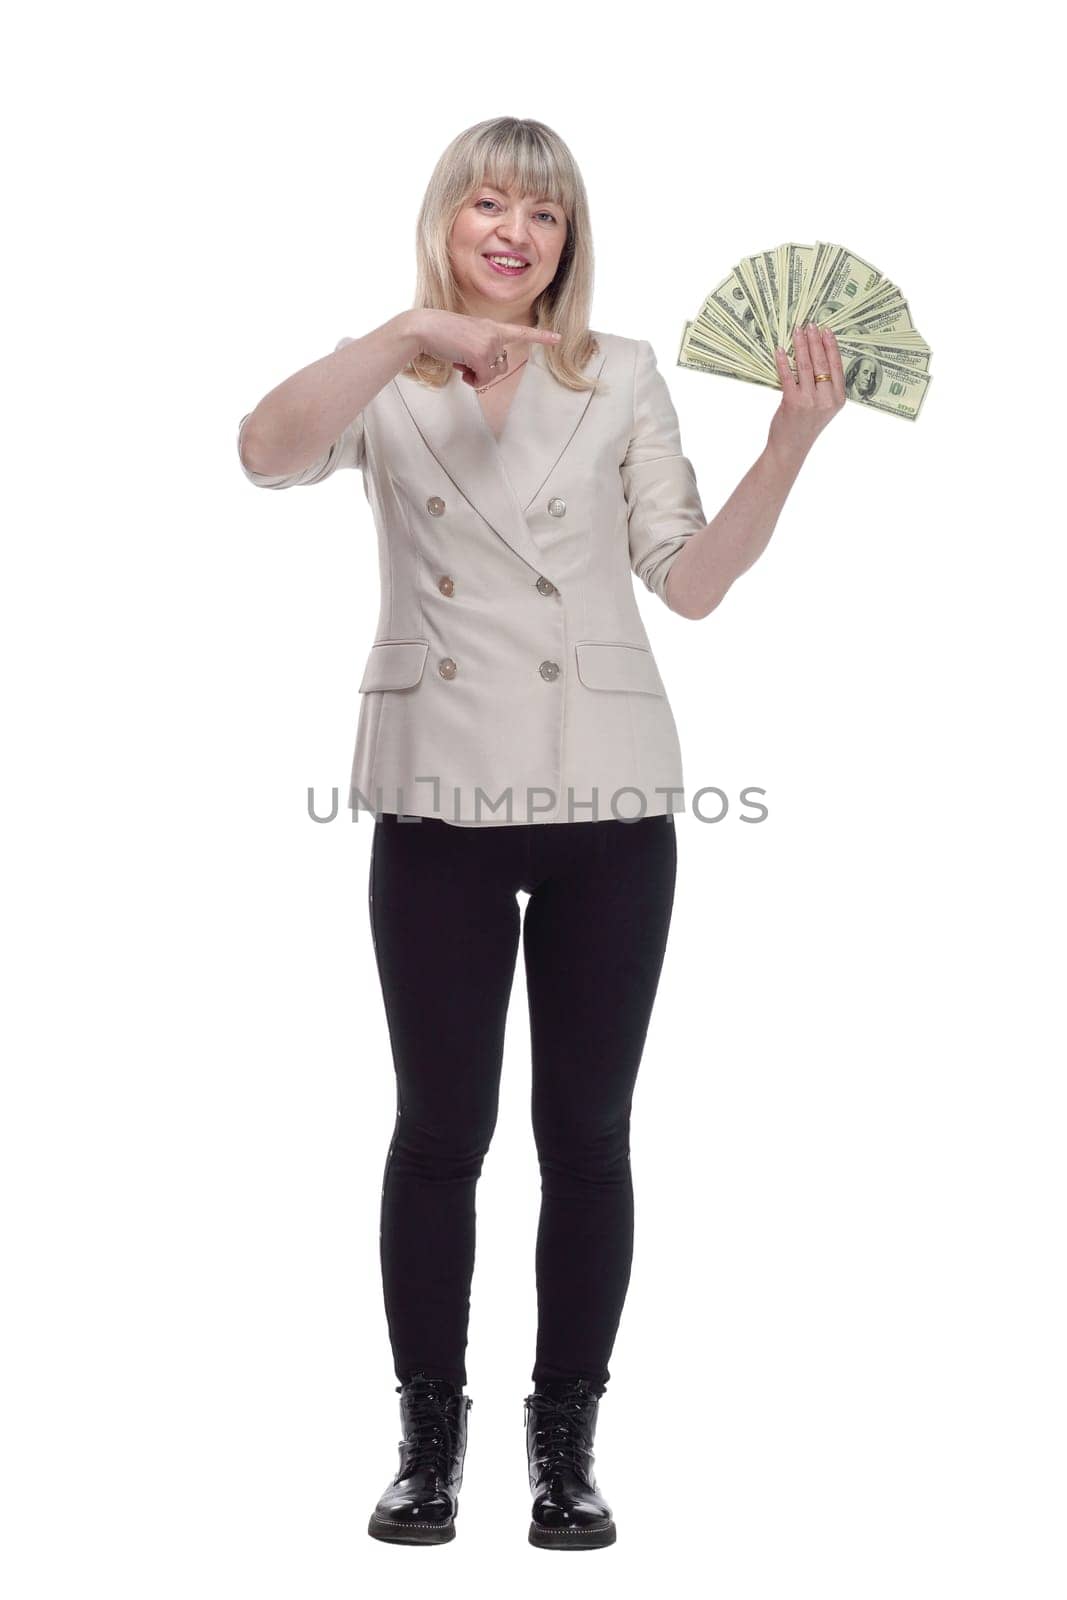 in full growth. very happy woman with dollar bills. isolated on a white background.